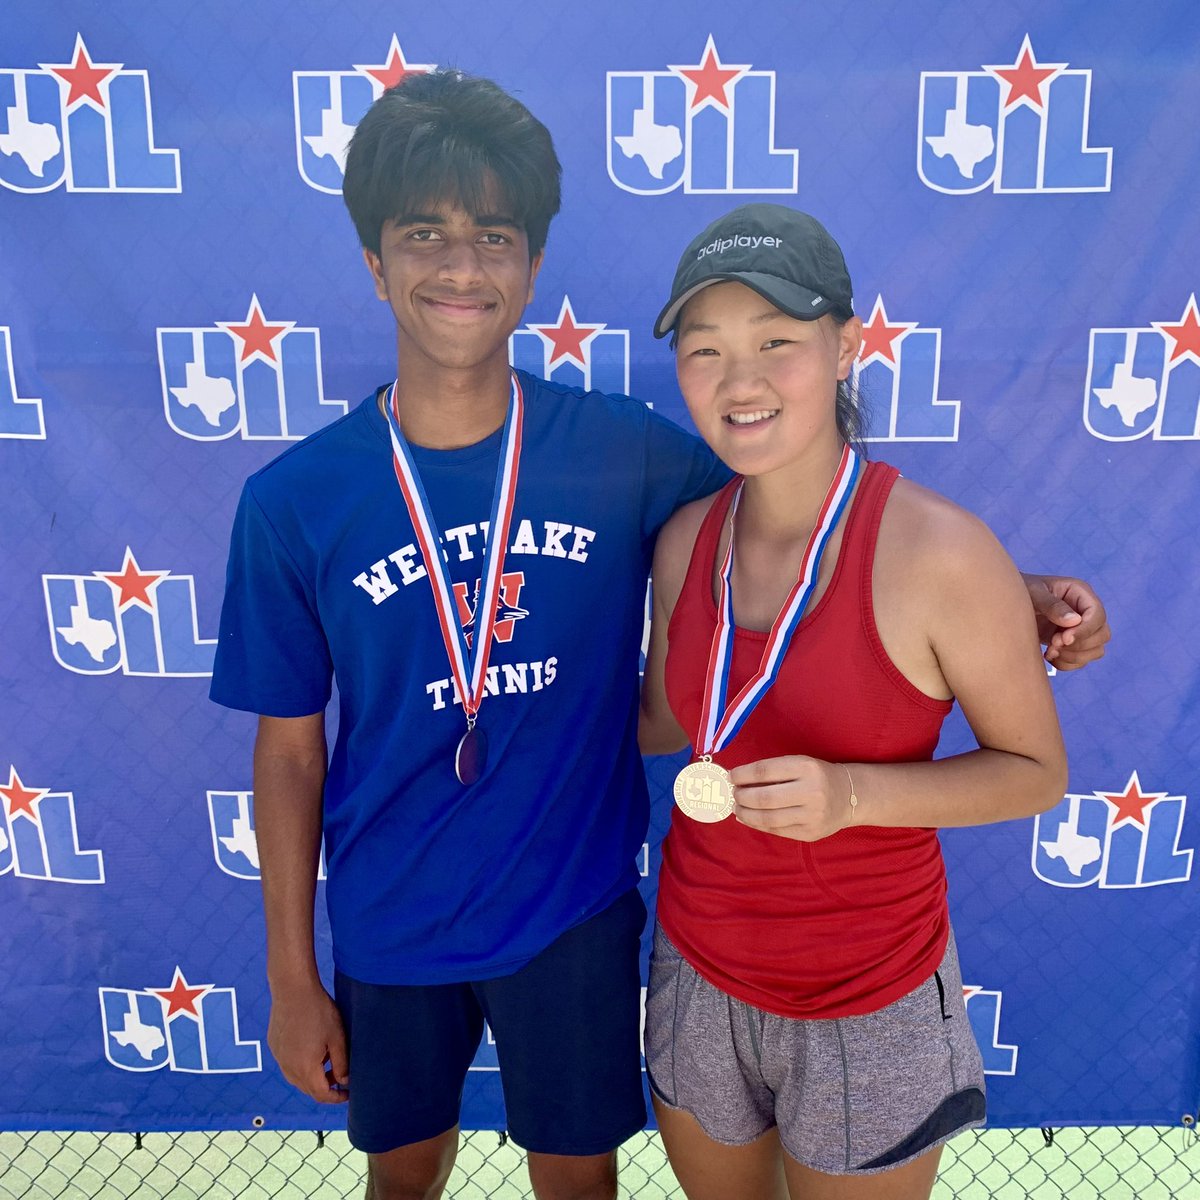 Bulusu and Zeng are headed to State! Abhi Bulusu and Chloe Zeng took 2nd place in Mixed Doubles at the Region IV Tennis Tournament in San Antonio. They completed two days of grueling tennis to qualify for a return to the 6A State Tennis Tournament. #GoChaps